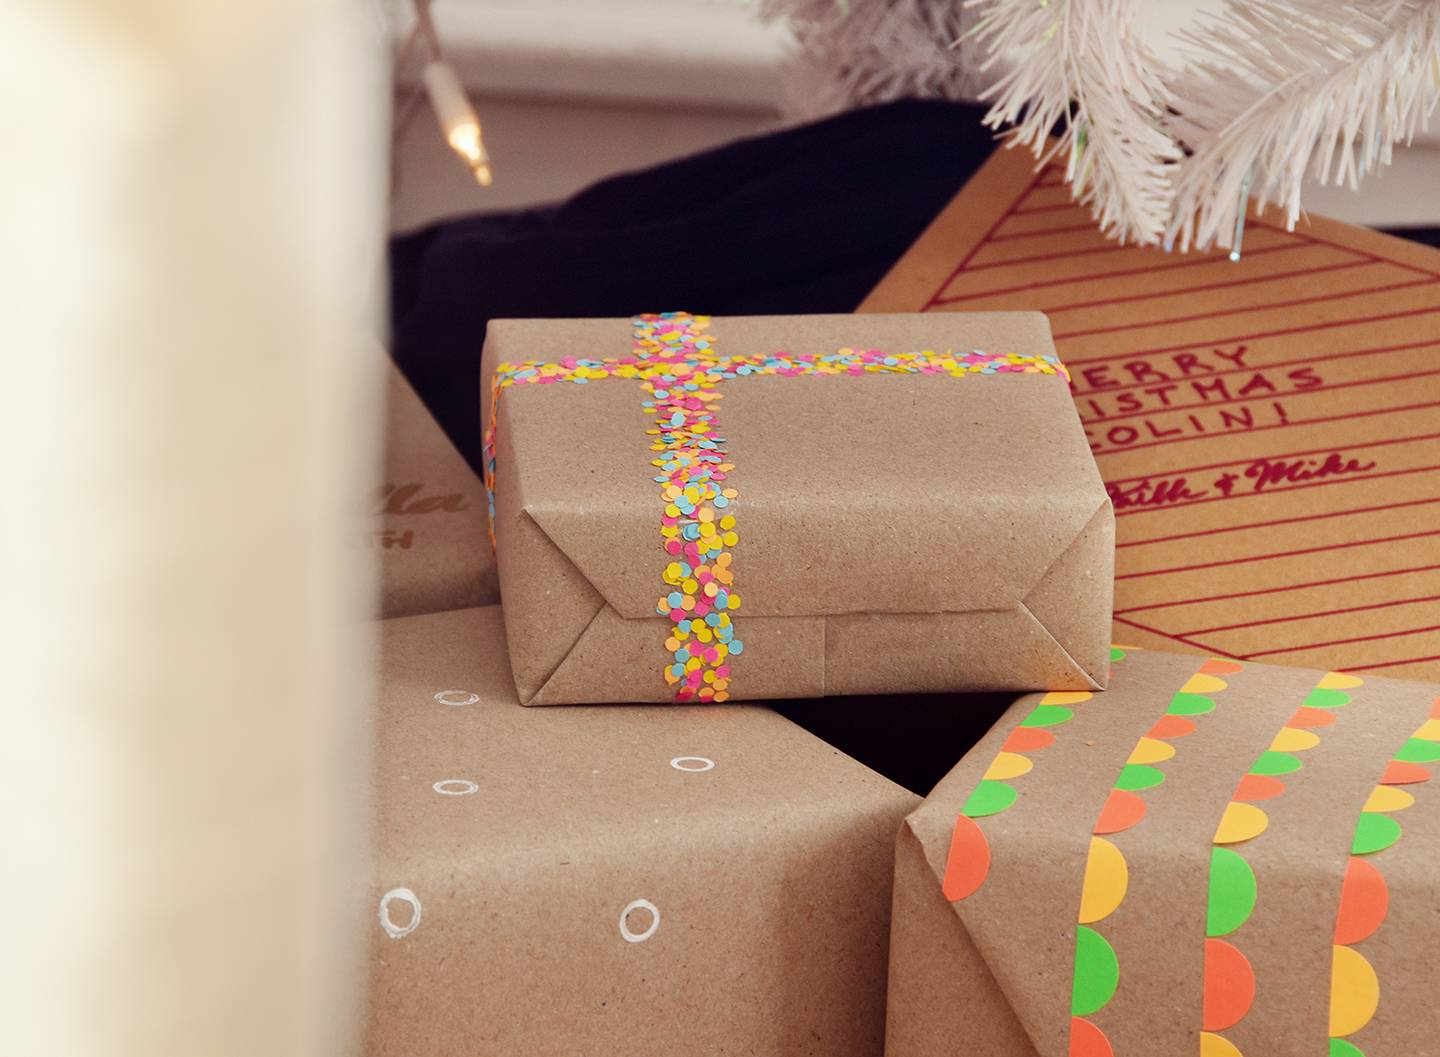 5 Ways To Wrap Gifts Using Office Supplies | For Curbly by Faith Towers Provencher #creative #gift #wrapping #holiday 